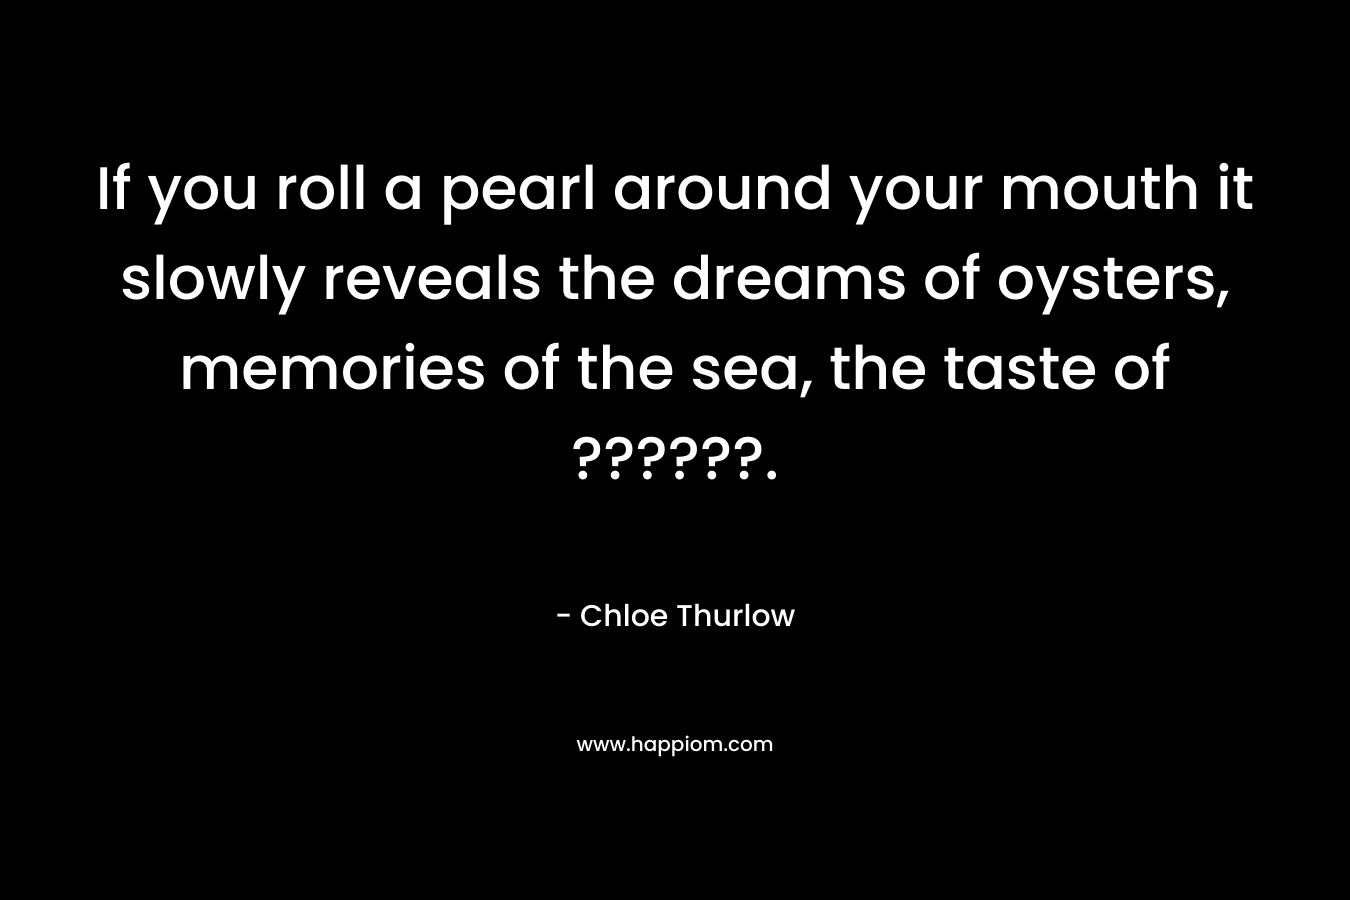 If you roll a pearl around your mouth it slowly reveals the dreams of oysters, memories of the sea, the taste of ??????. – Chloe Thurlow